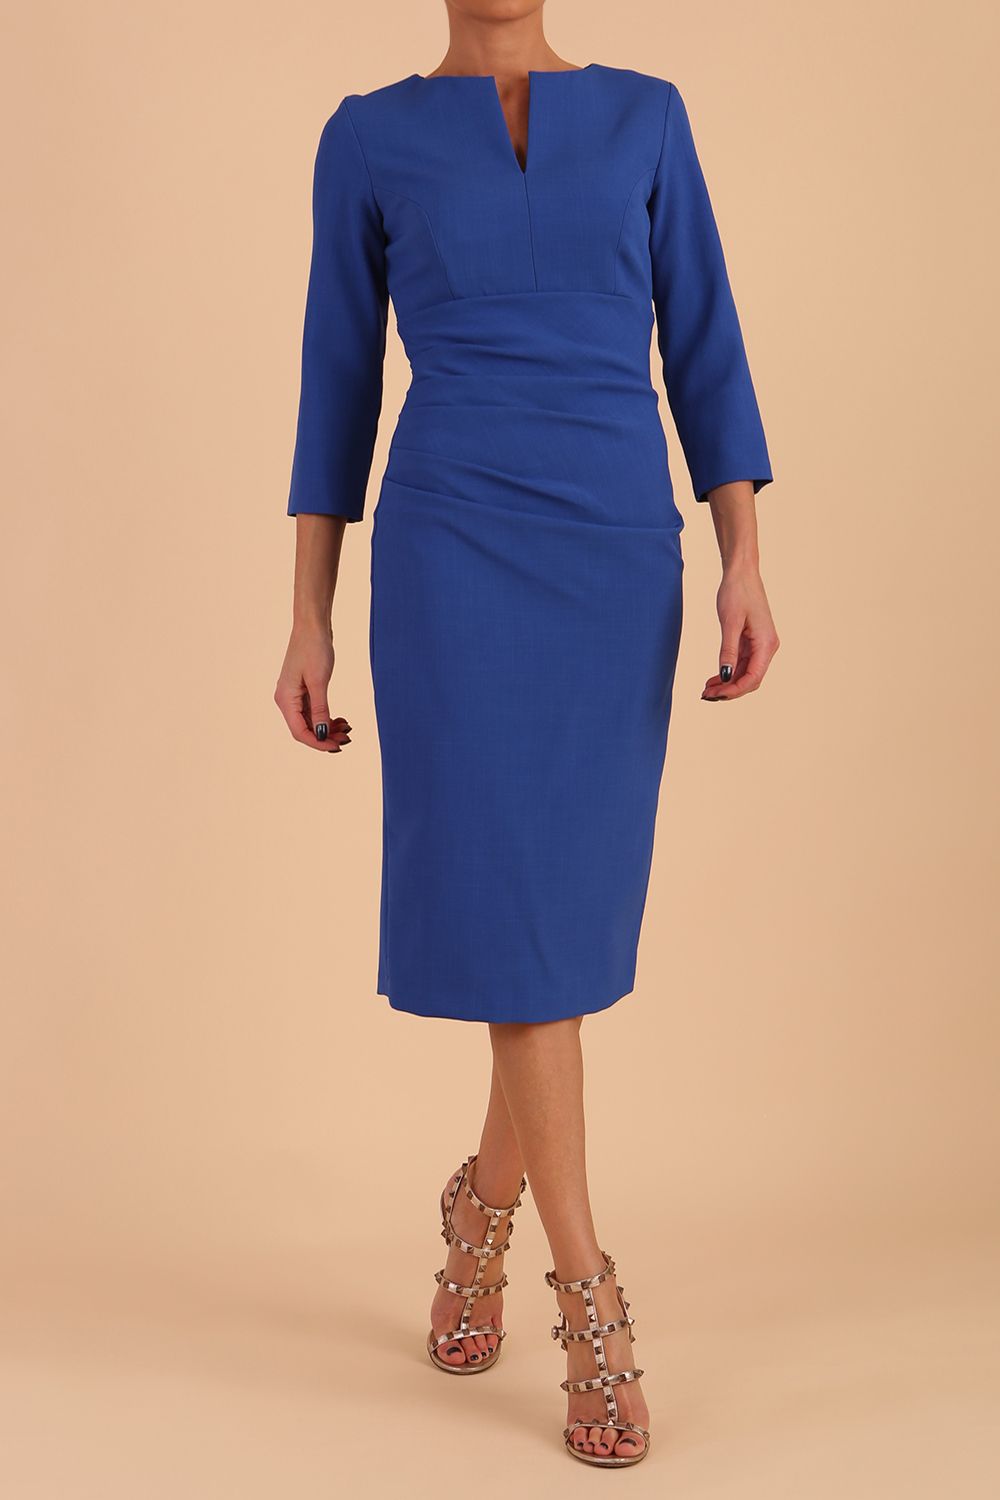 model is wearing diva catwalk chandos sheath dress with three quarter sleeve and slit in the middle of the neckline in cobalt blue front